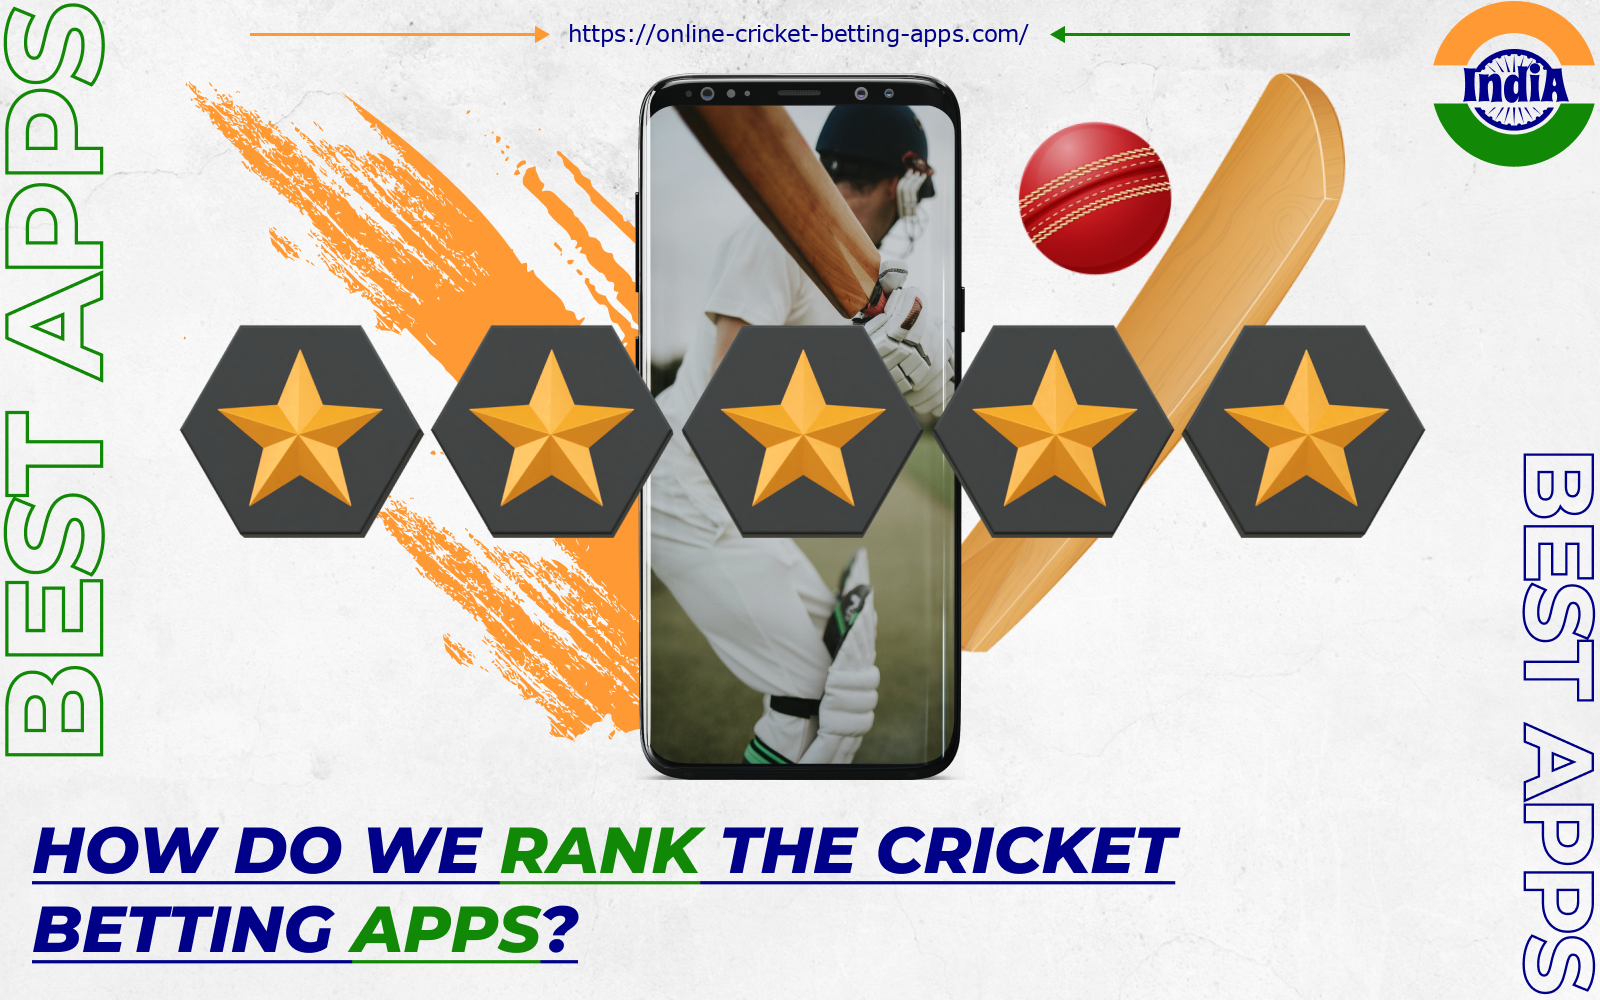 While selecting the top 10 best cricket betting apps for India, we have taken a detailed and comprehensive approach by analysing all the factors that influence the user experience